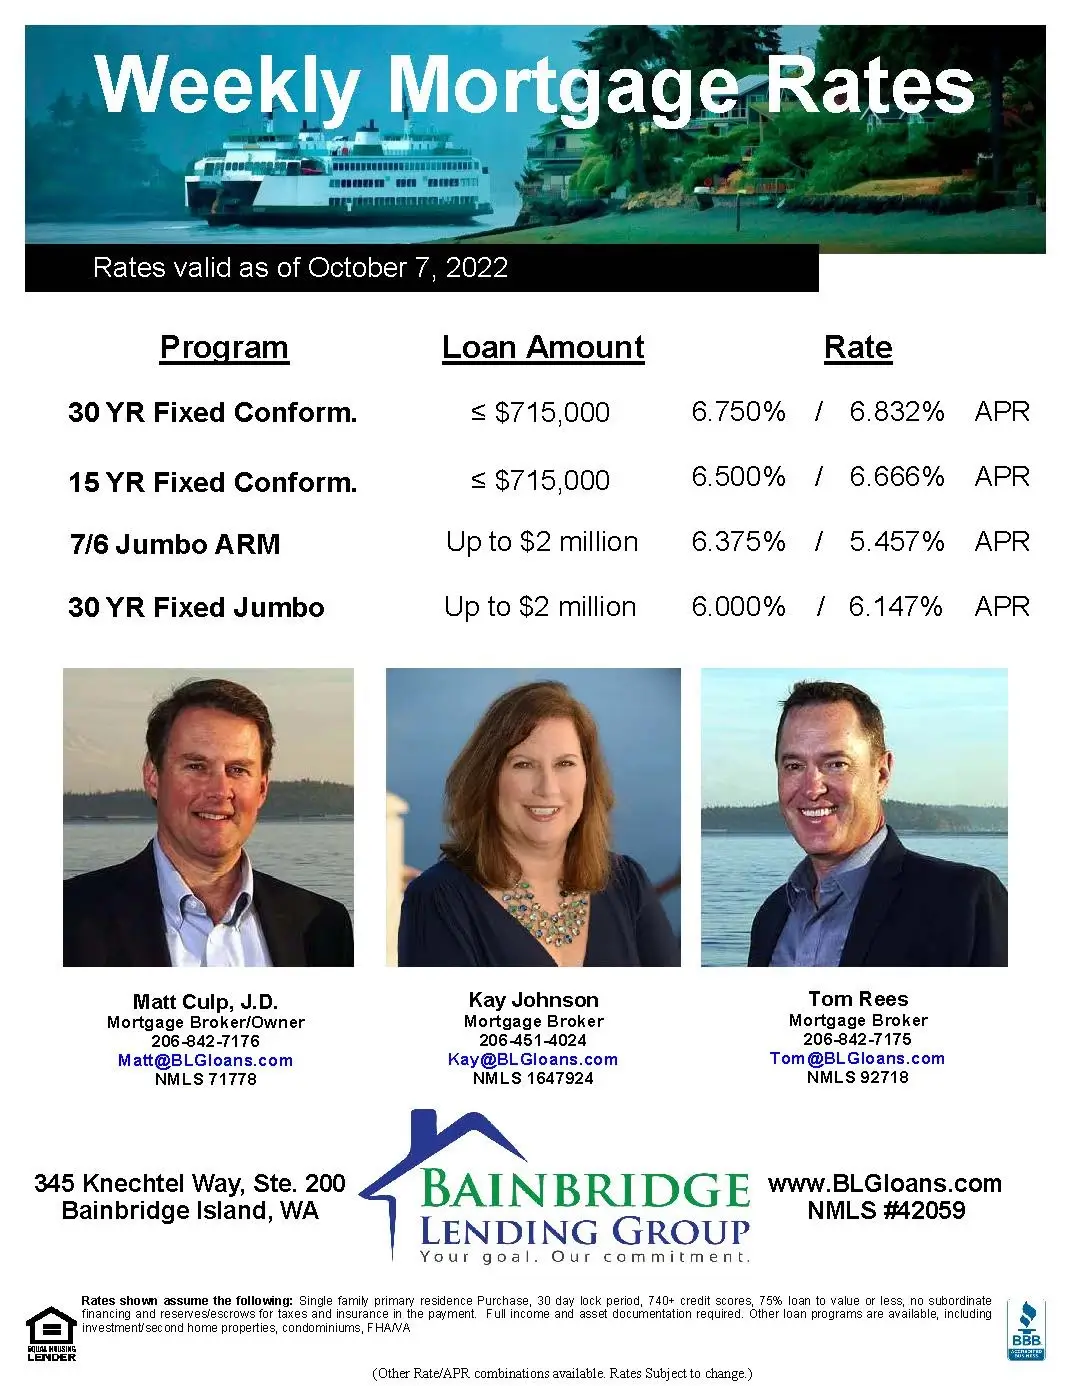 Weekly Rate Update for October 7, 2022